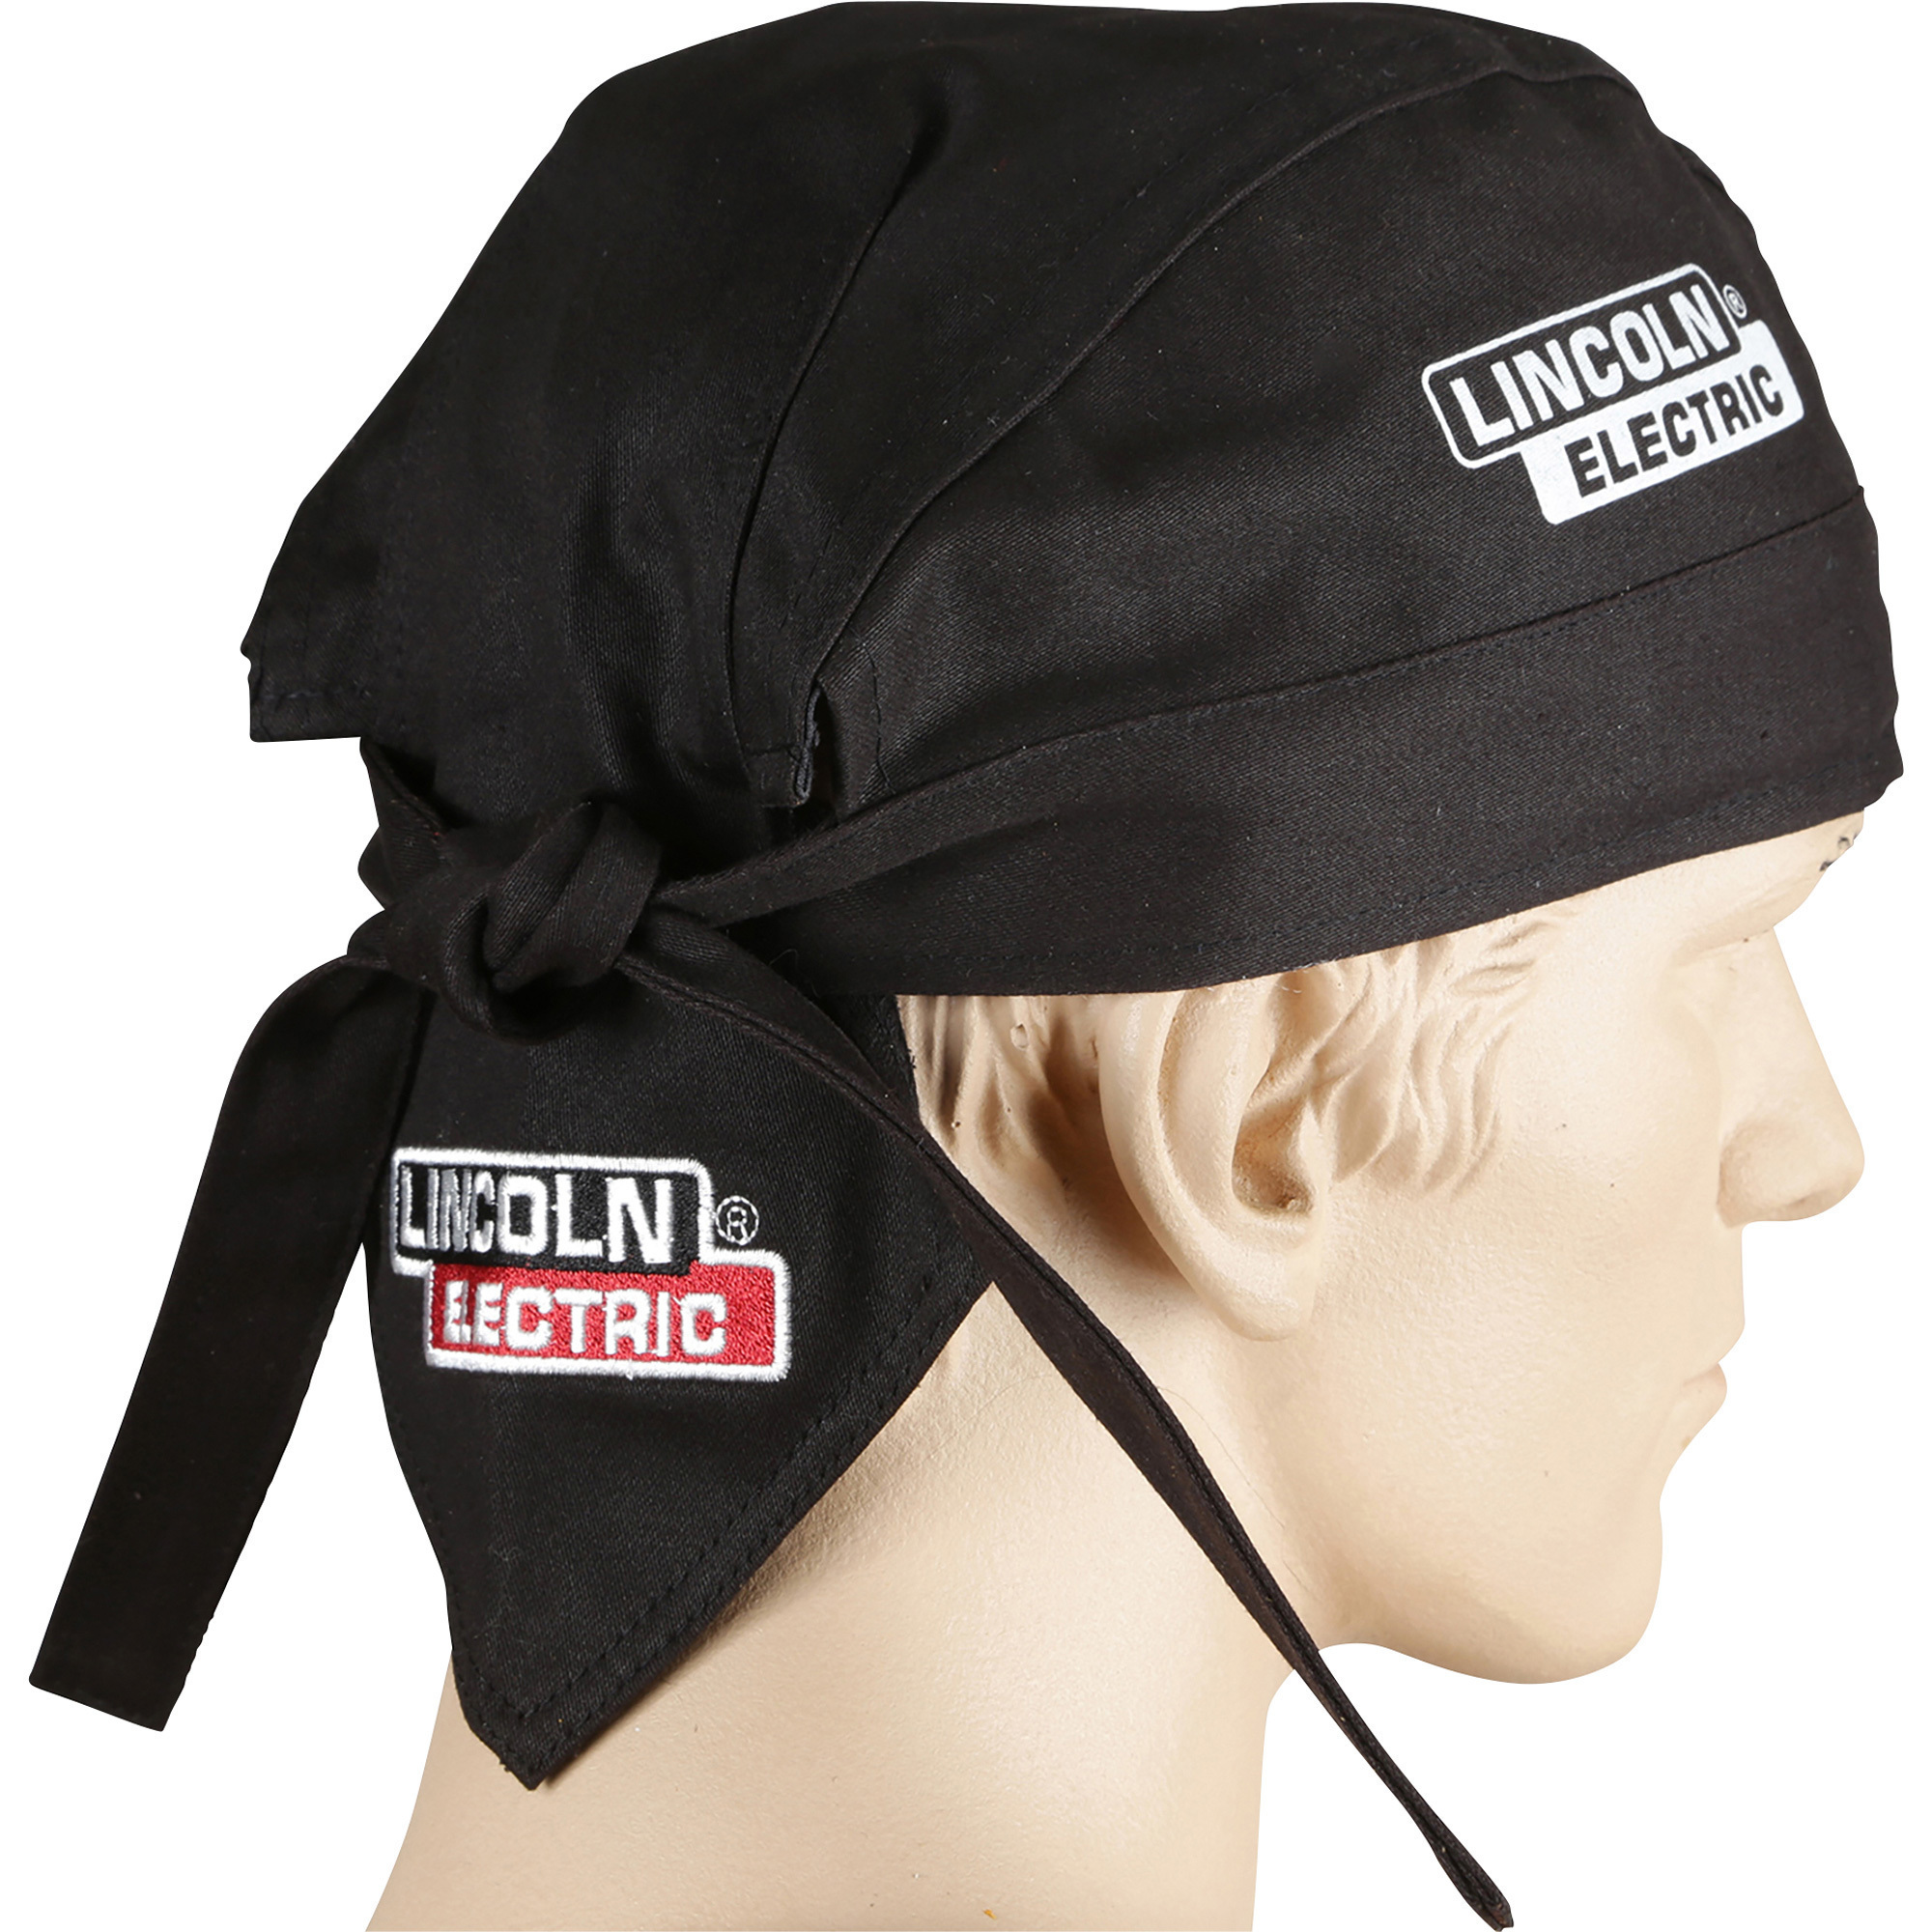 Lincoln Electric Premium Doo Rag, Black, One Size Fits Most, Model KH822